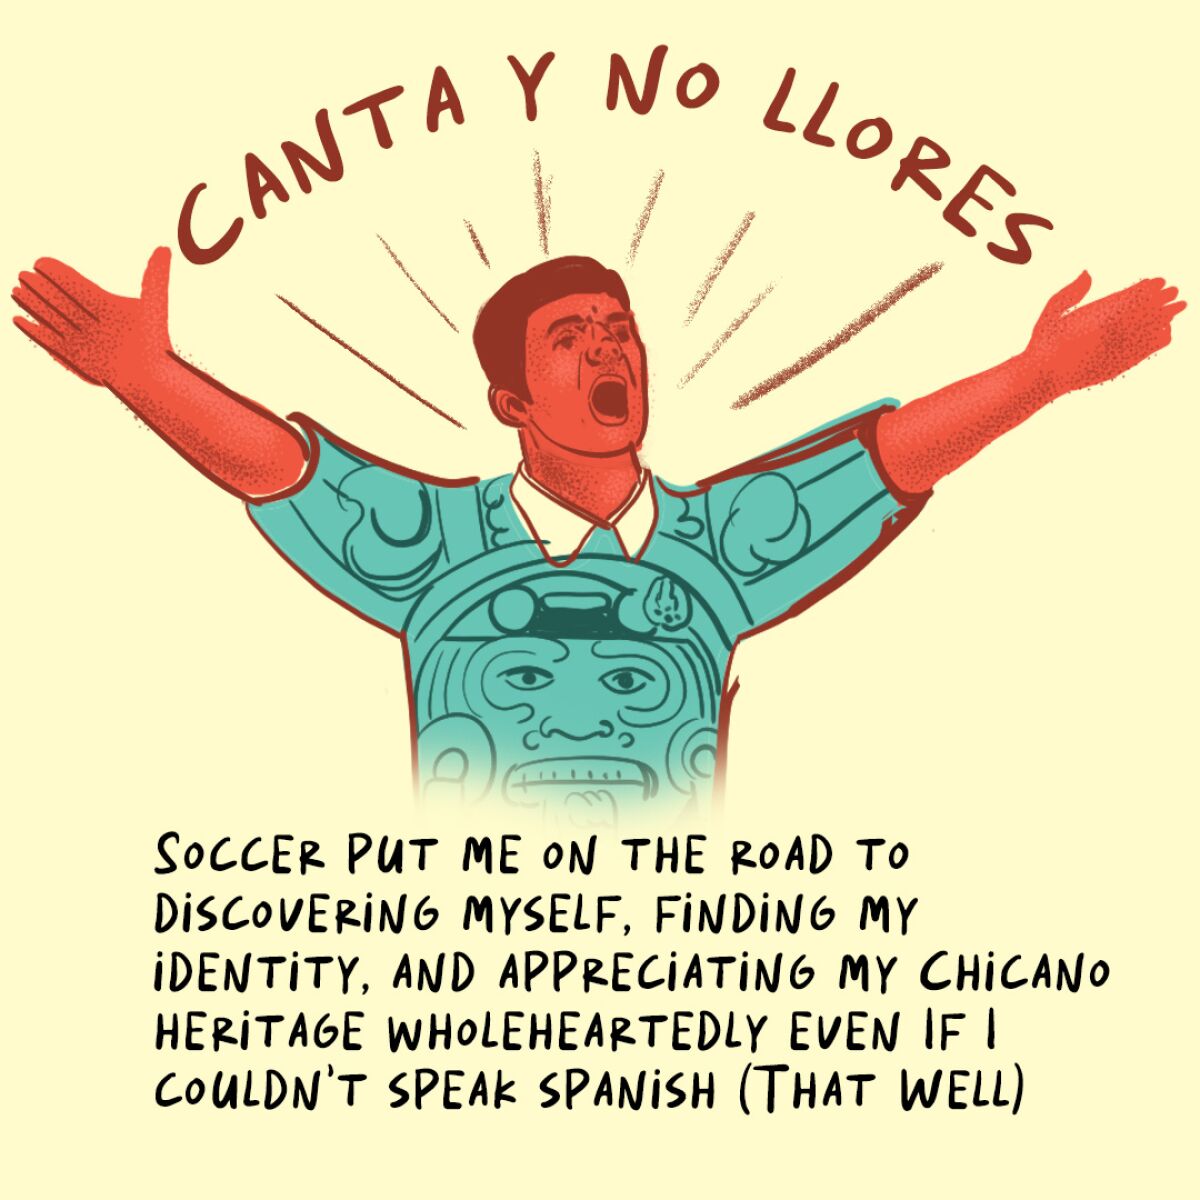 Soccer put me on the road to discovering myself. Finding my identity and appreciating my chicano heritage. 